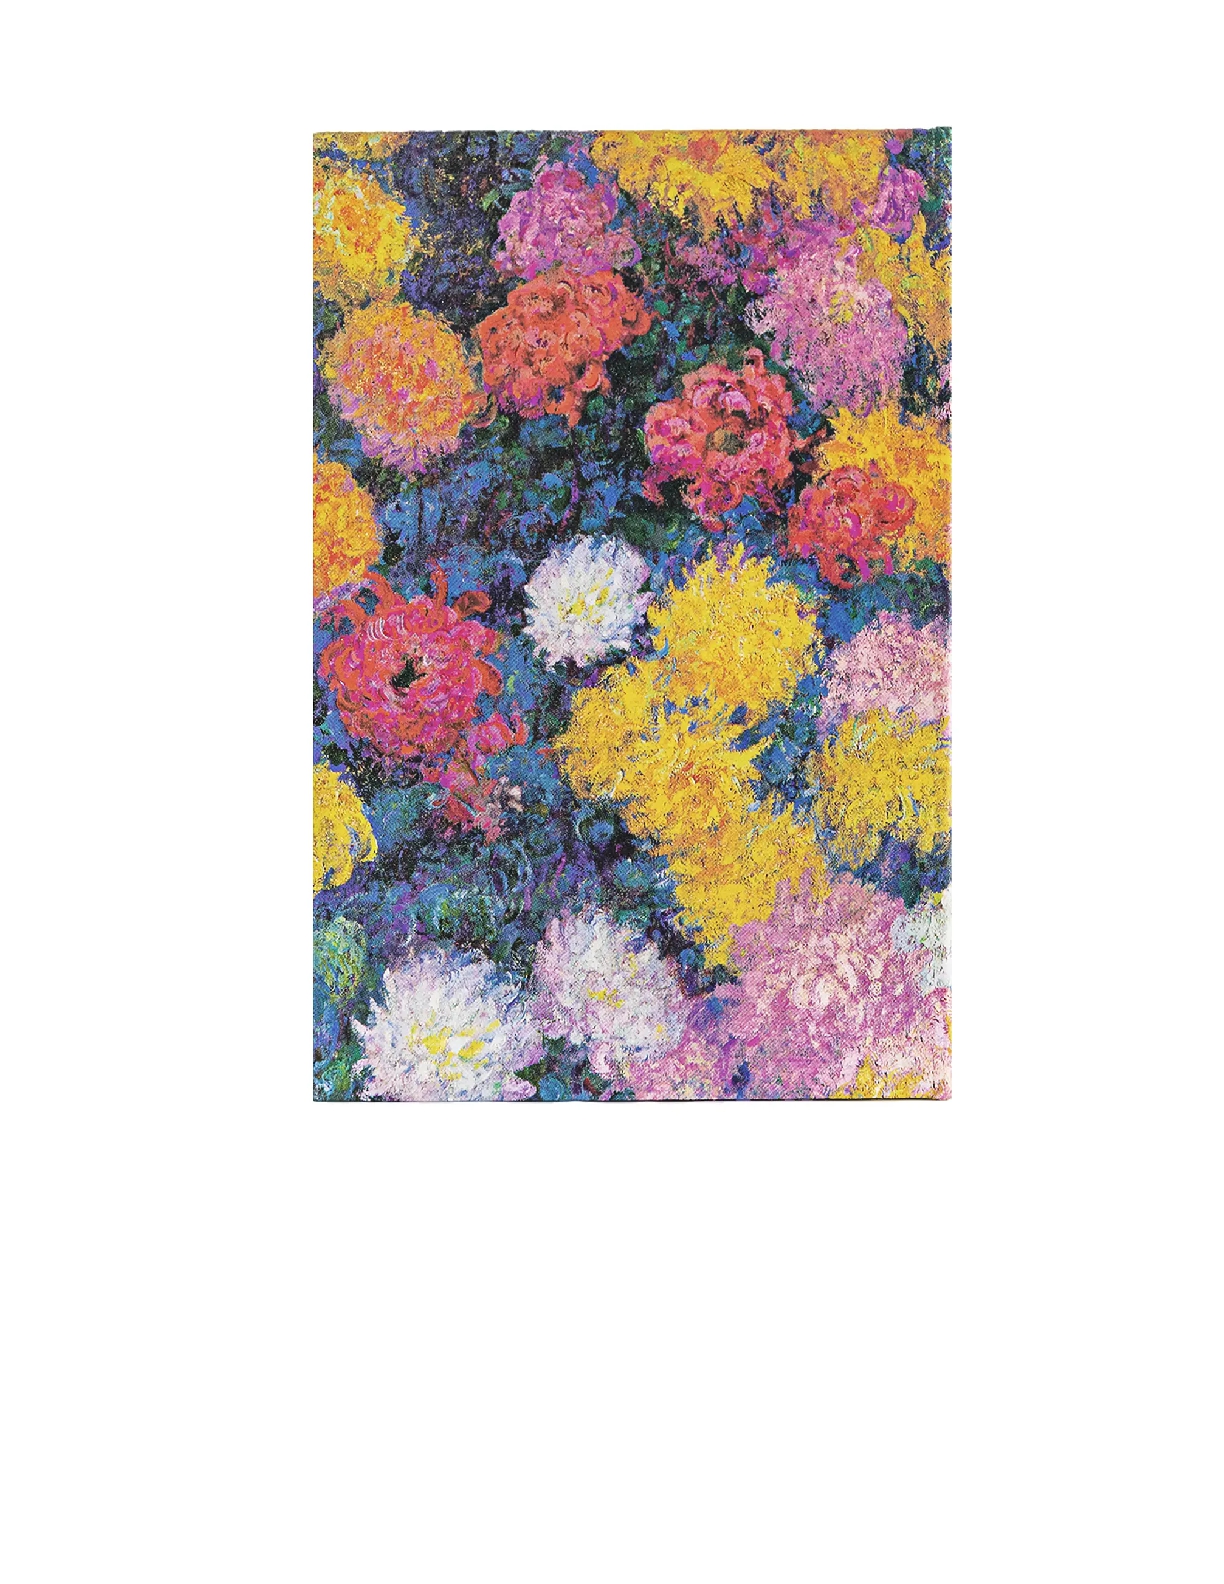 Monet's Chrysanthemums, Hardcover Journals, Mini, Lined, Elastic Band, 176 Pg, 85 GSM